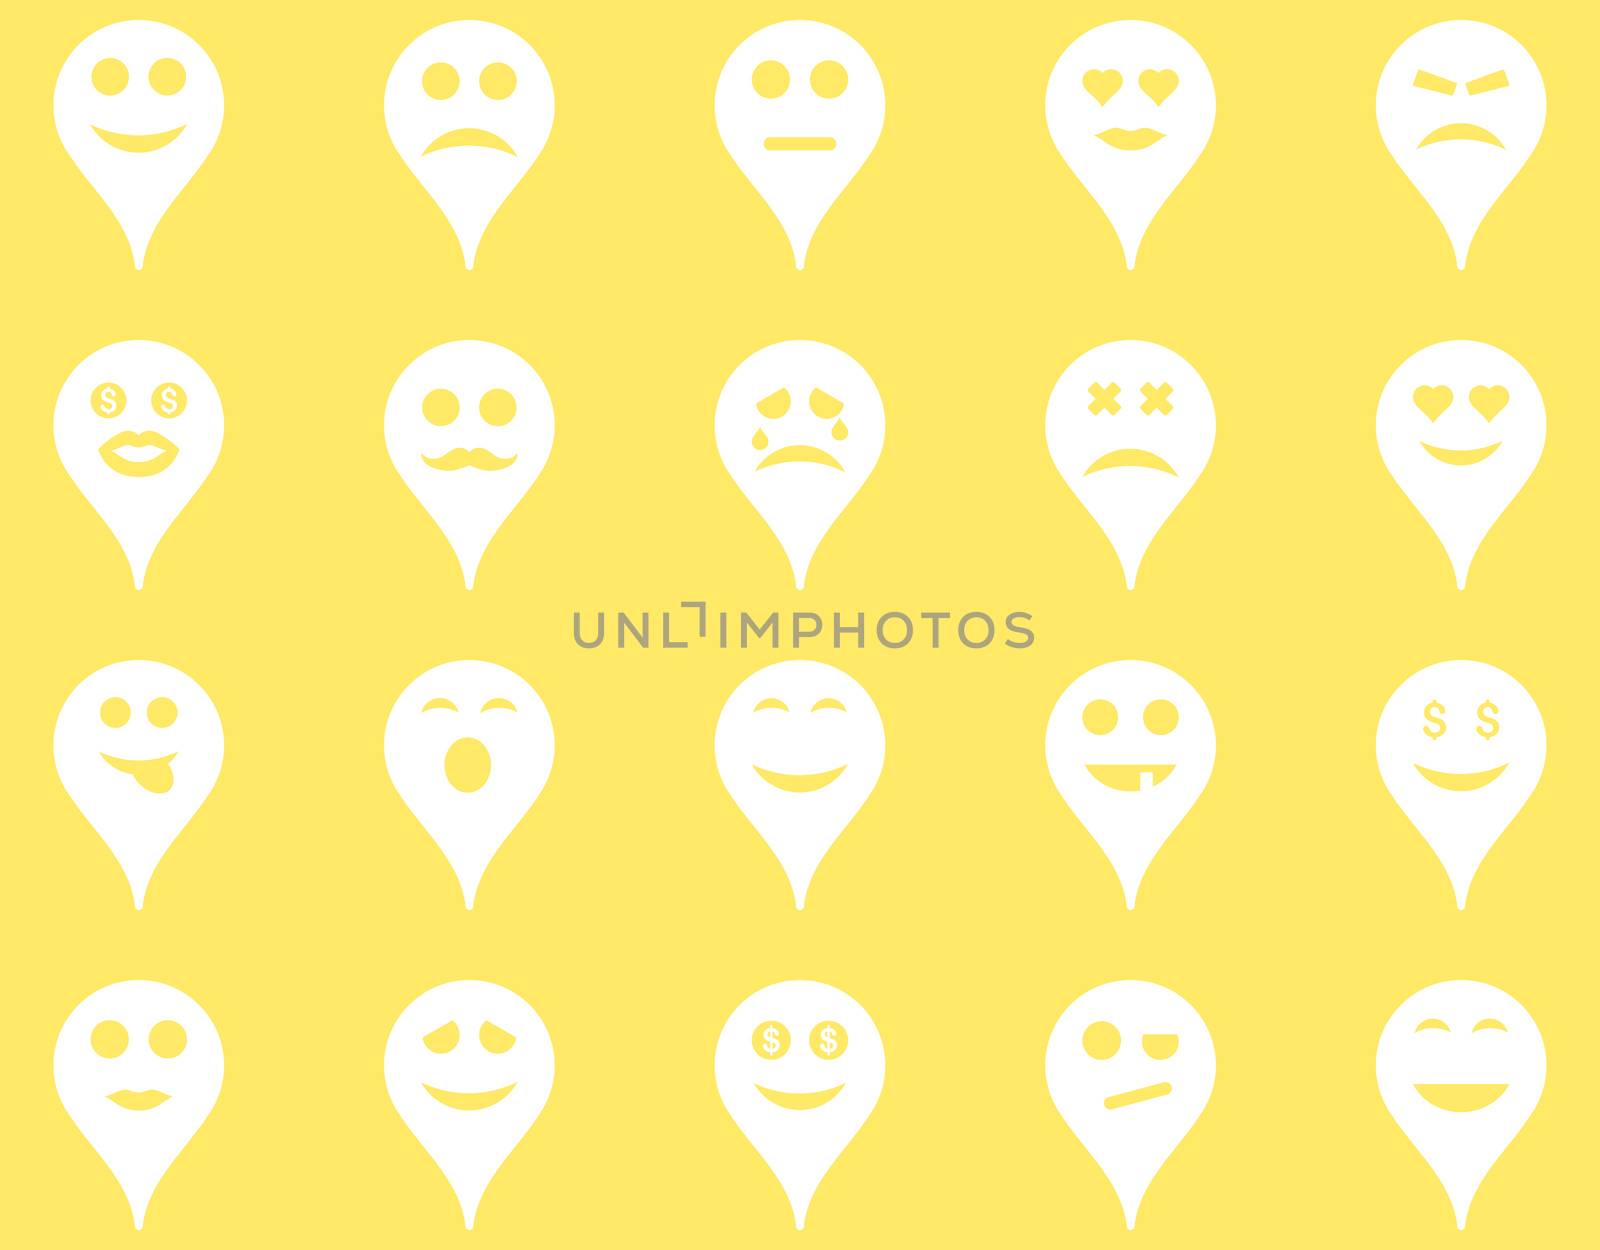 Emotion map marker icons. Glyph set style is flat images, white symbols, isolated on a yellow background.